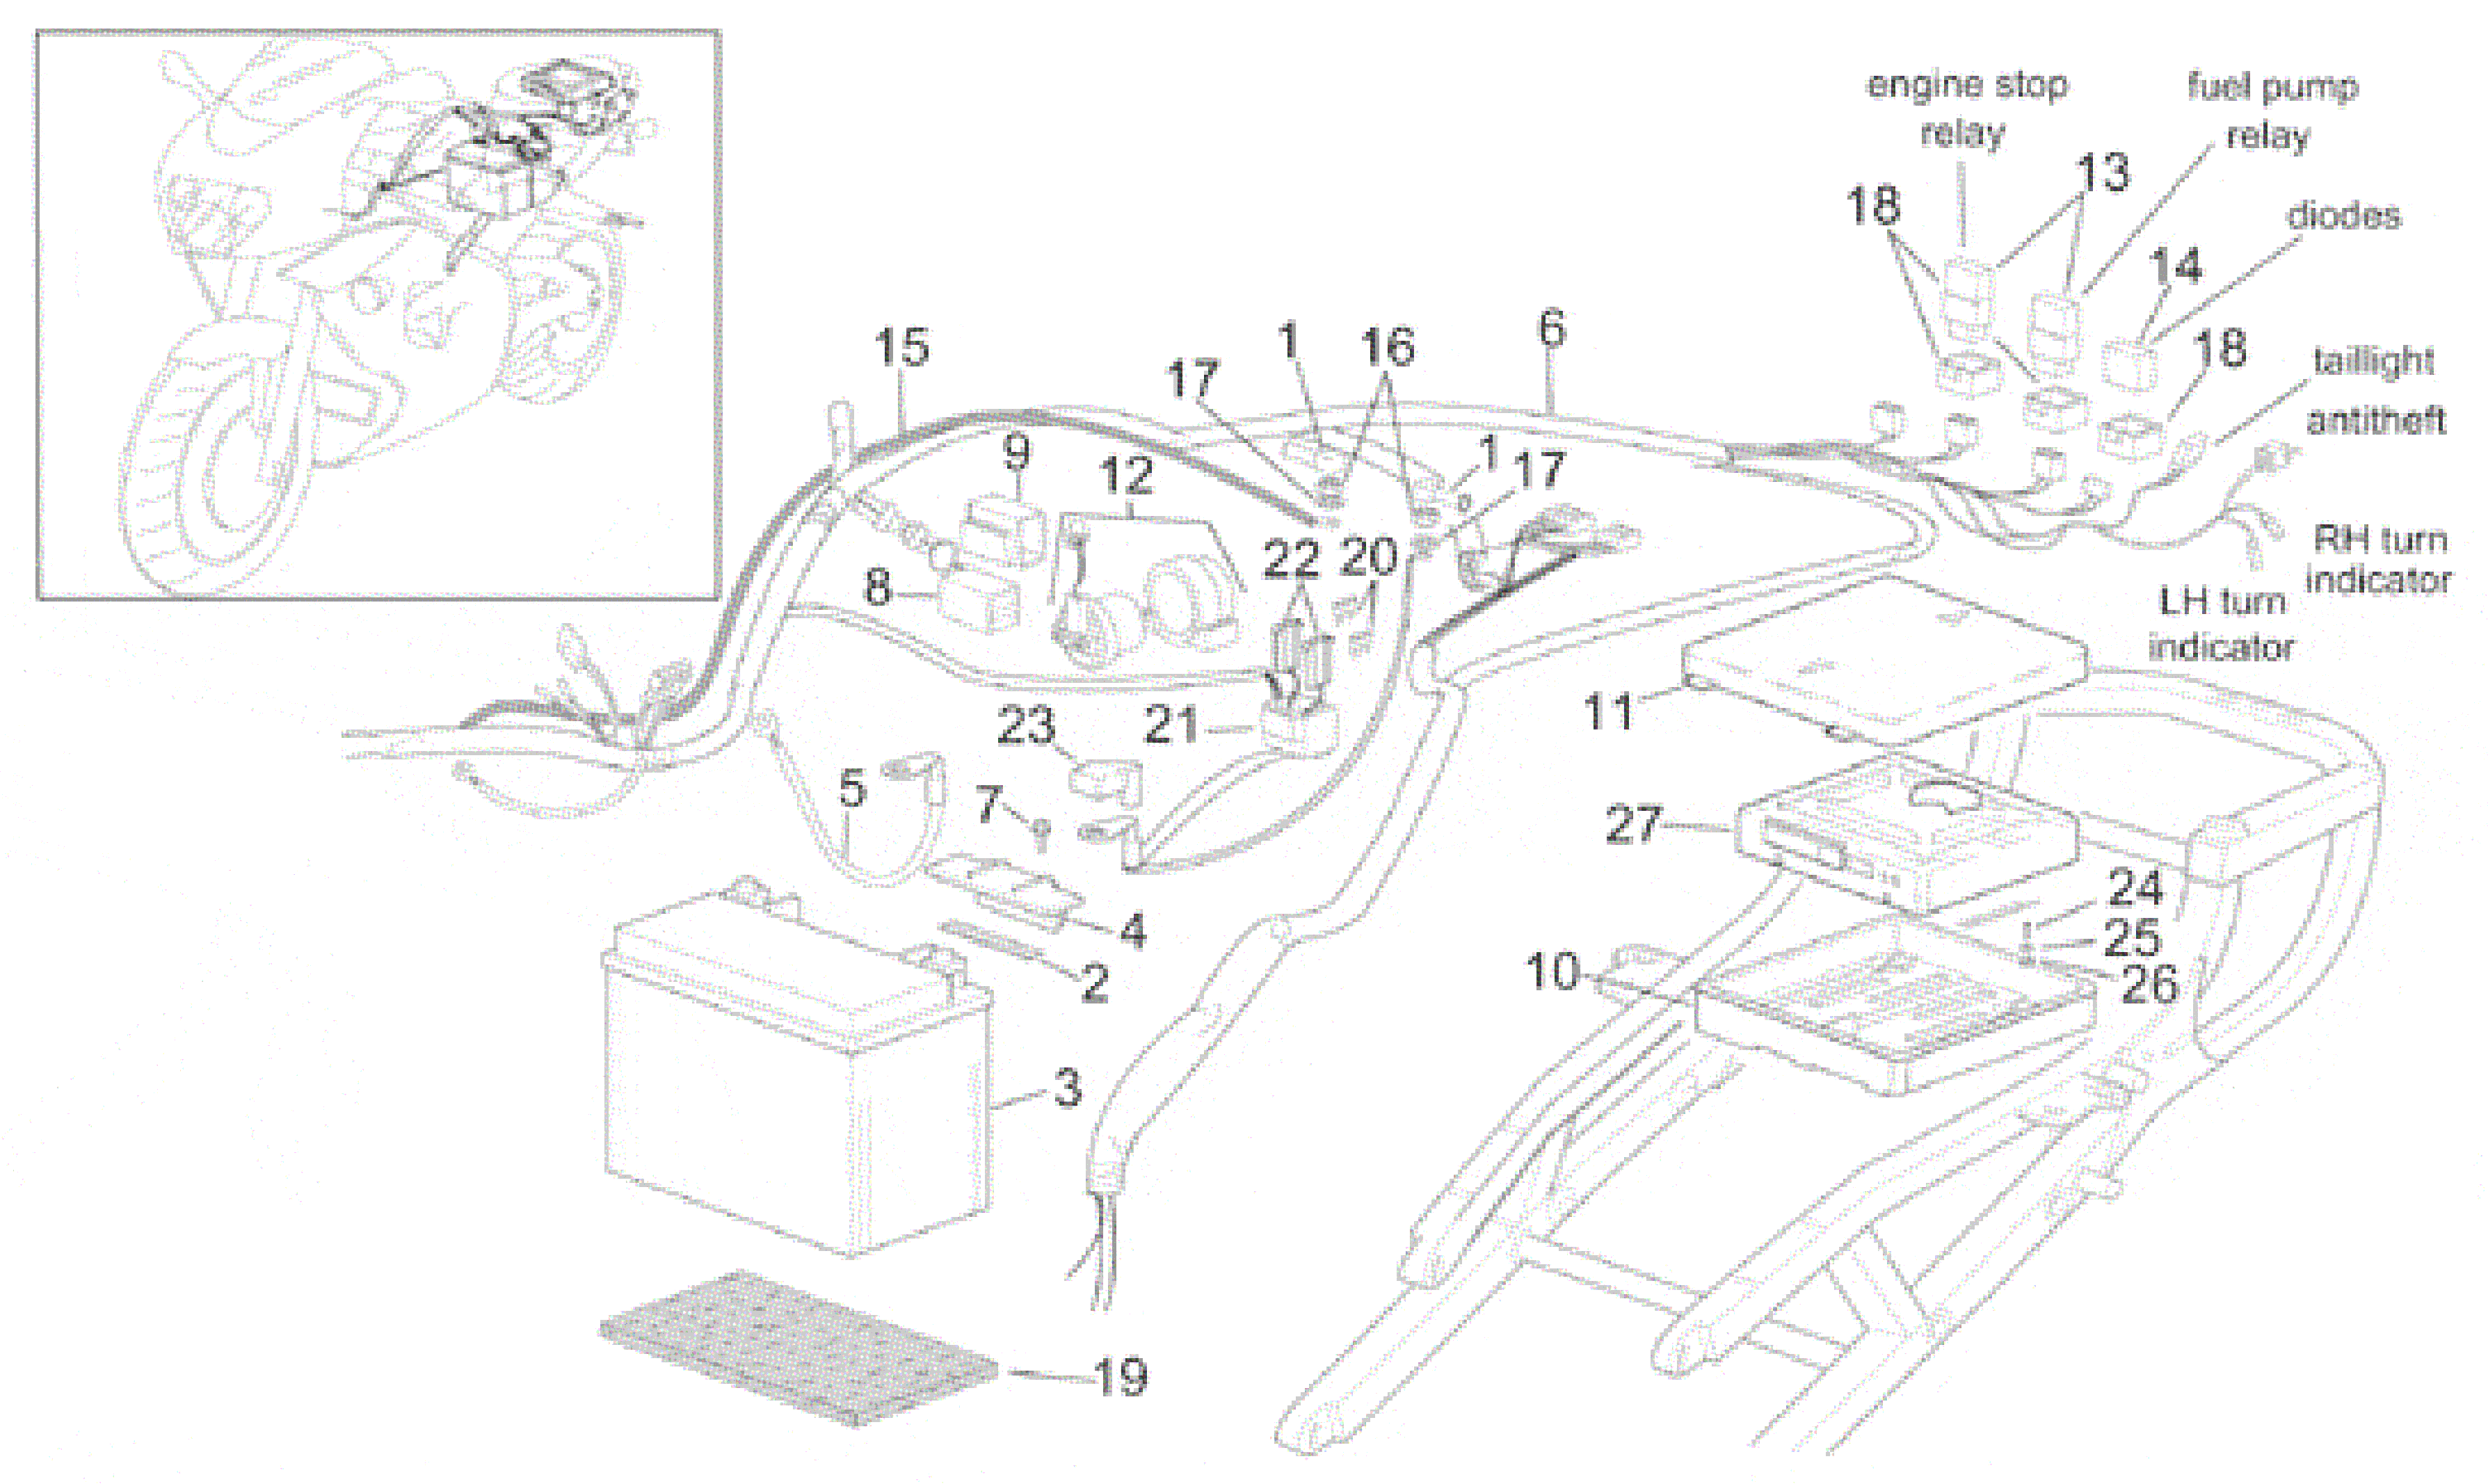 Rear electrical system